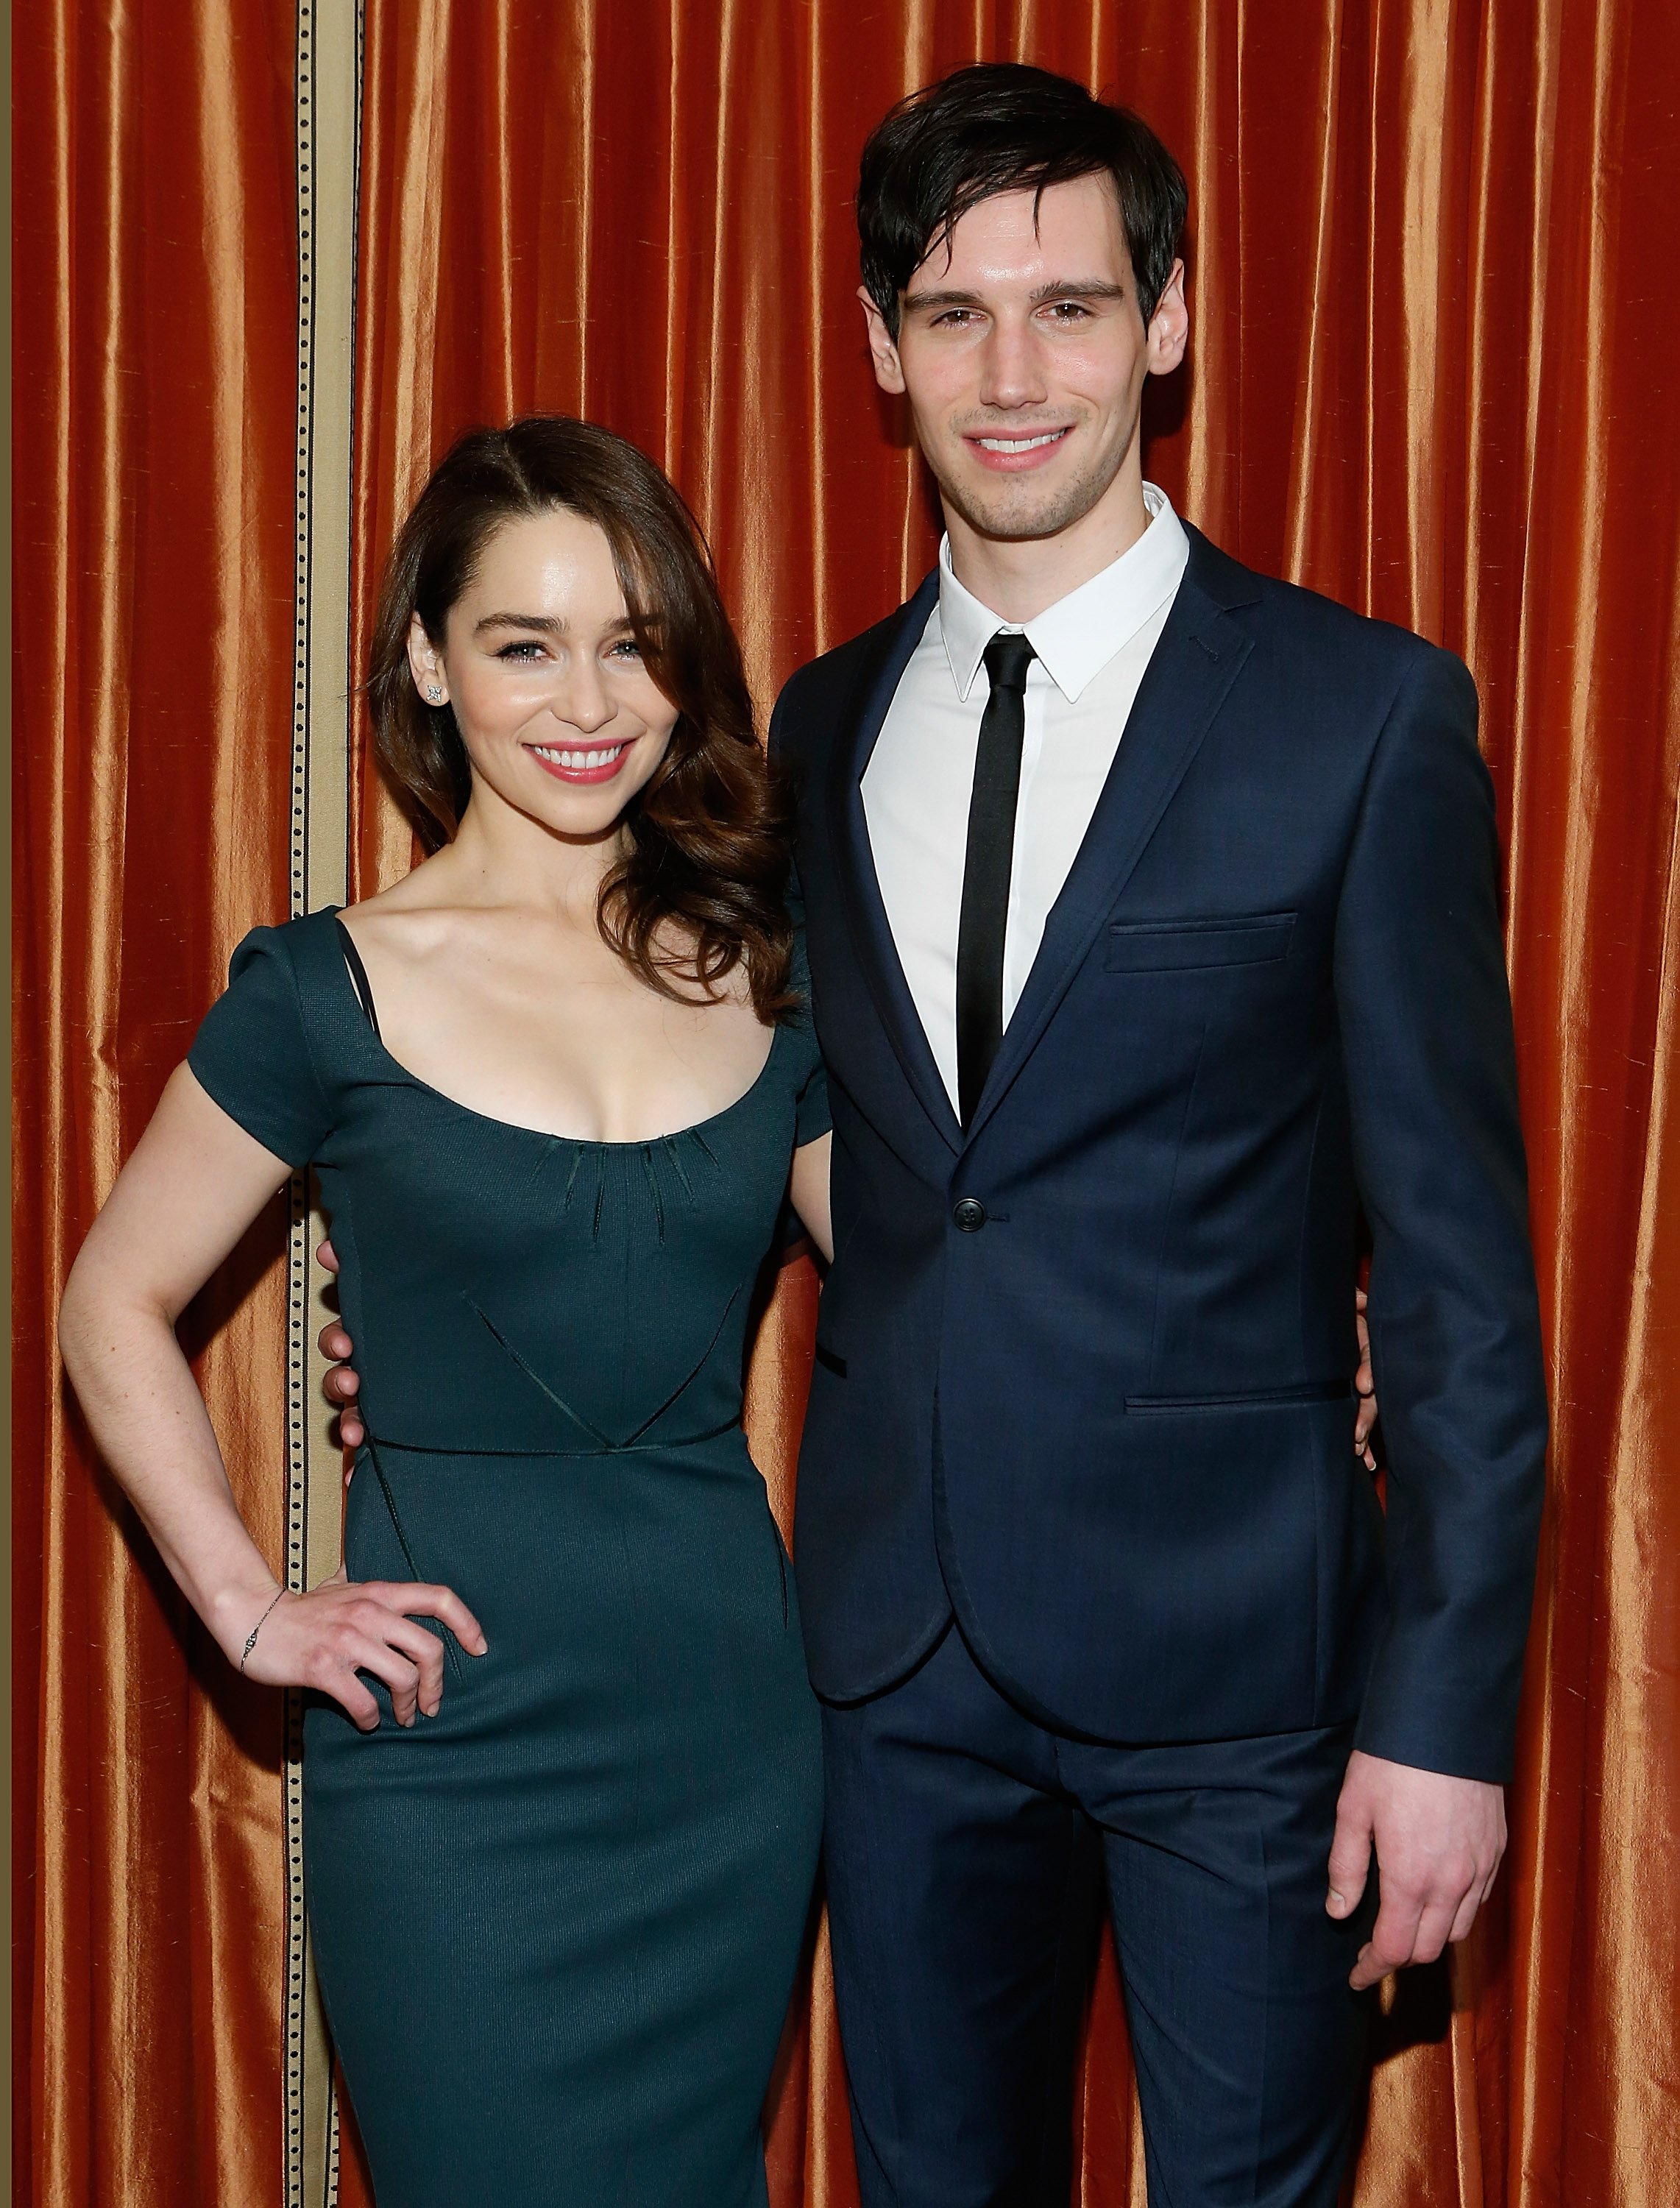 Emilia Clarke and Cory Michael Smith attend the "Breakfast At Tiffany's" Press Preview at Cafe Carlyle on February 27, 2013, in New York City. | Source: Getty Images